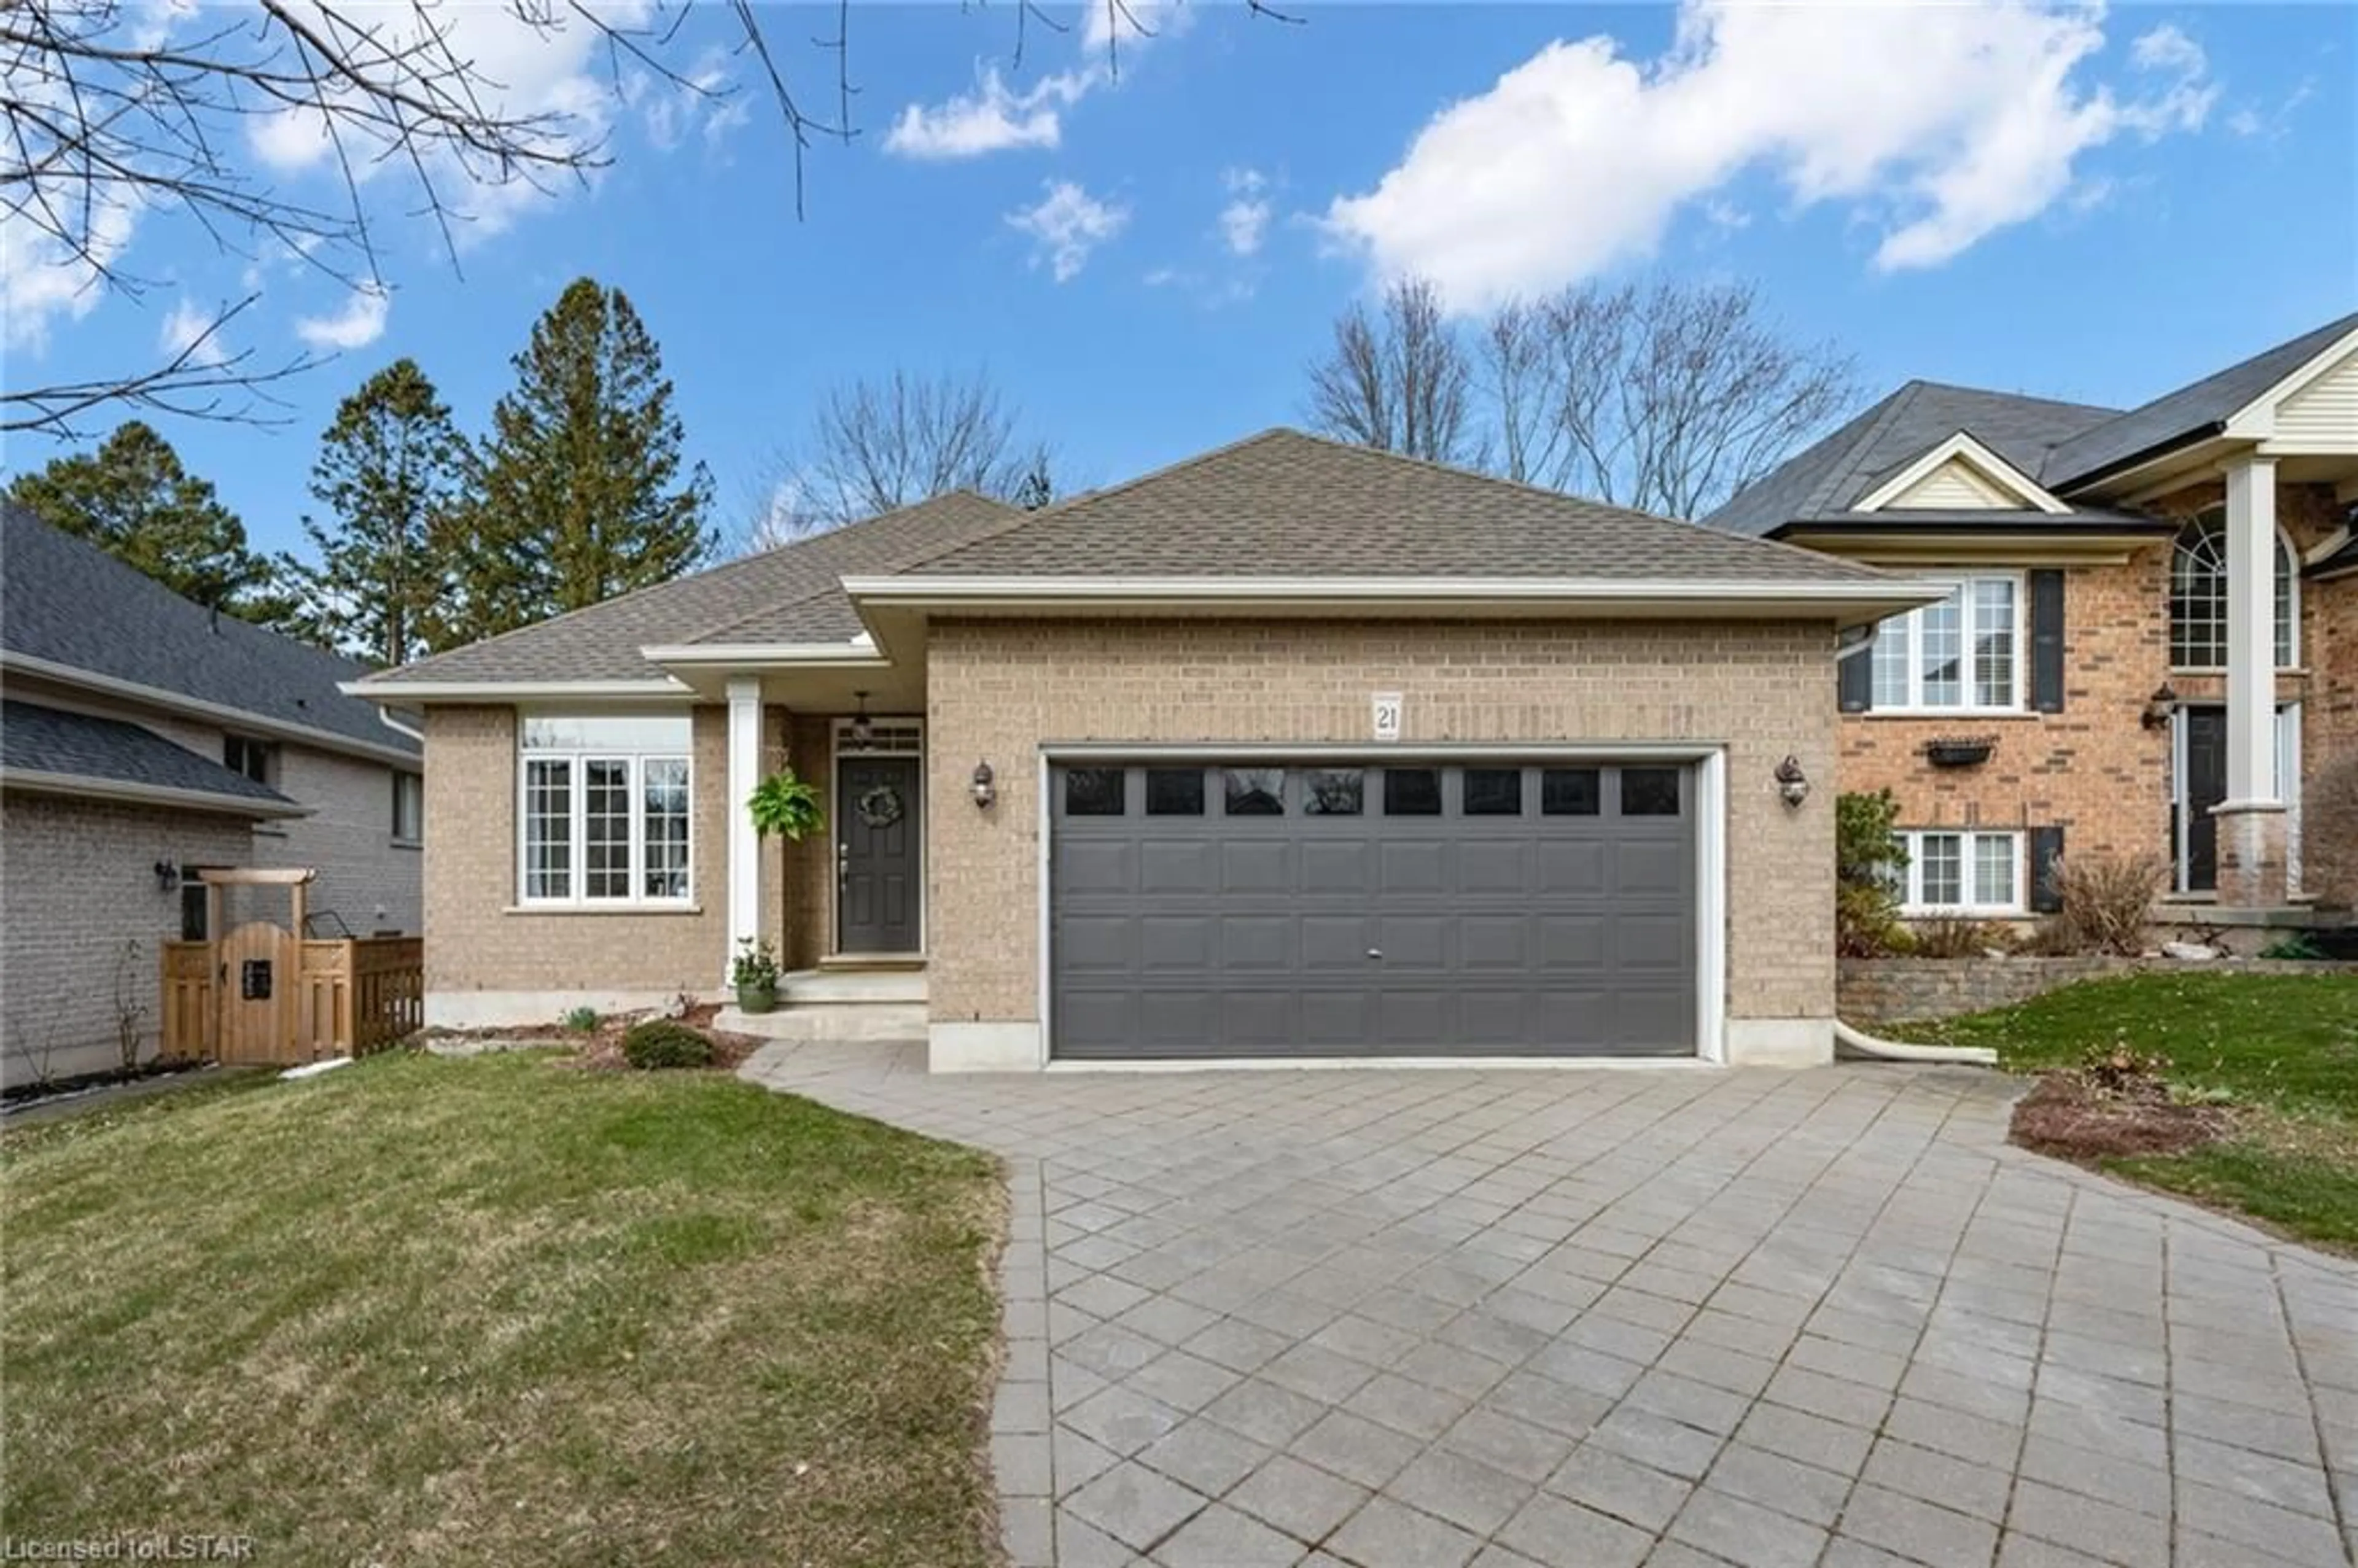 Home with brick exterior material for 21 Little Creek Pl, Port Stanley Ontario N5L 1K1